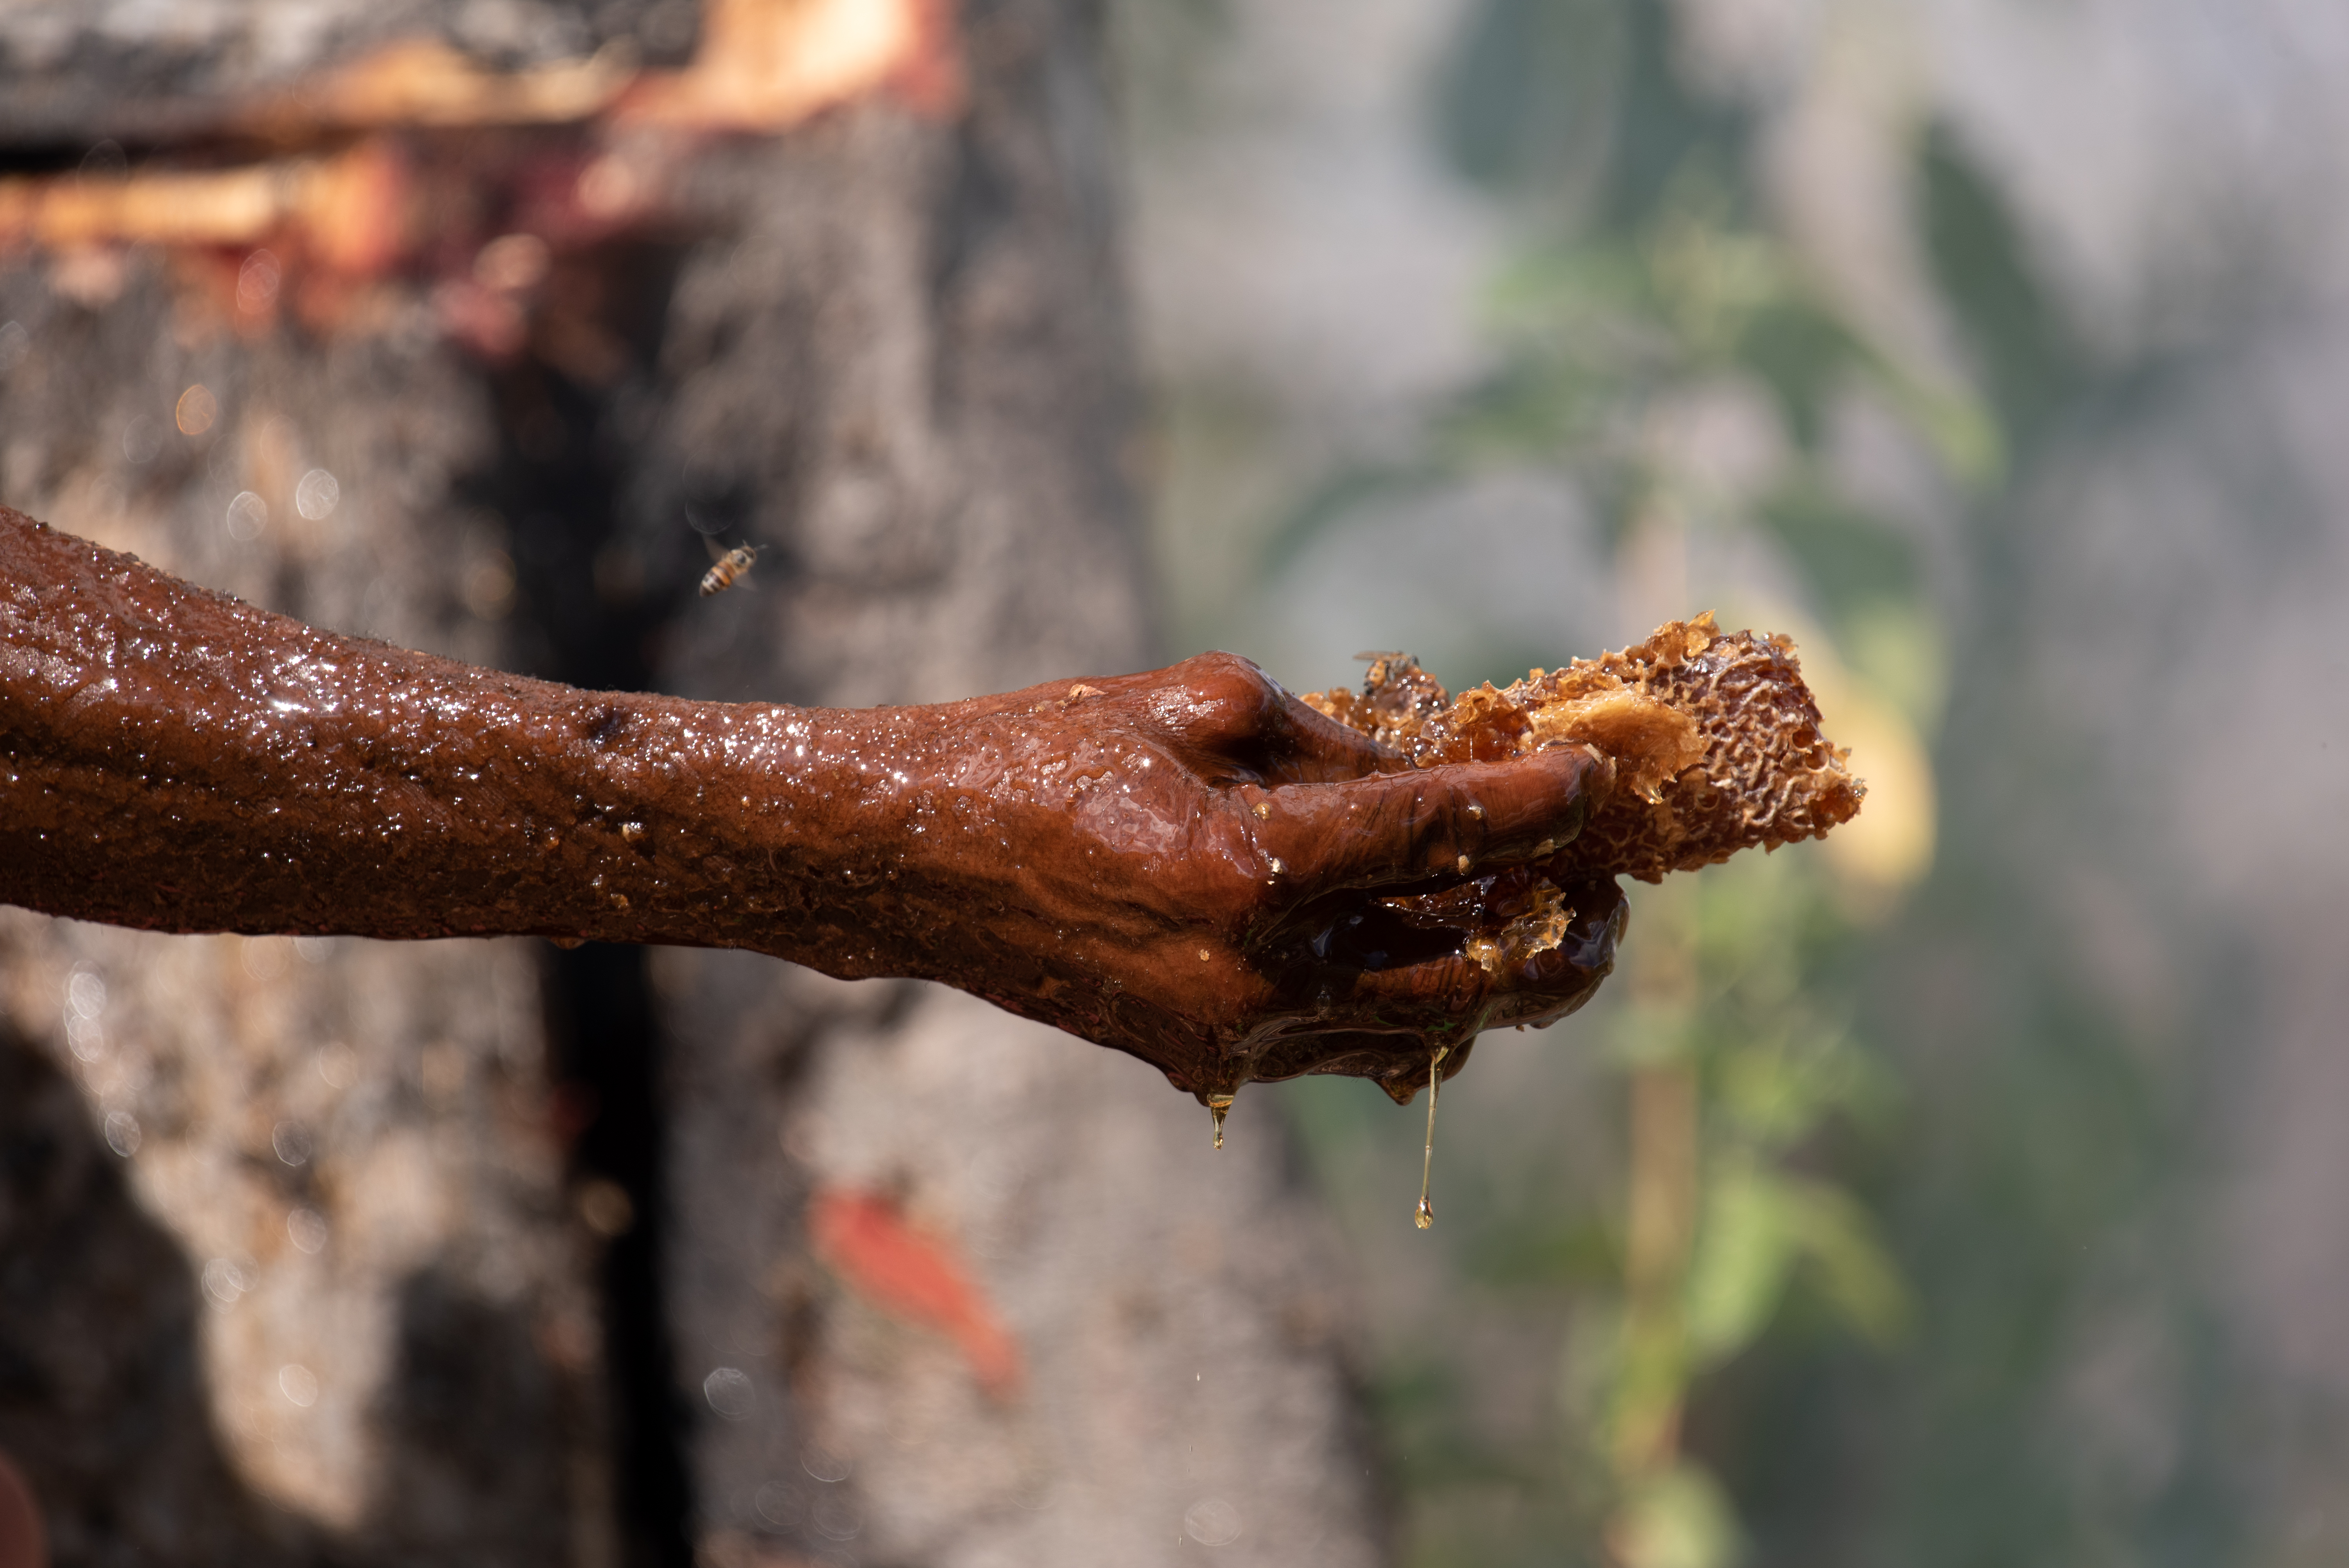 Honey-harvest in the Niassa Special Reserve in Mozambique